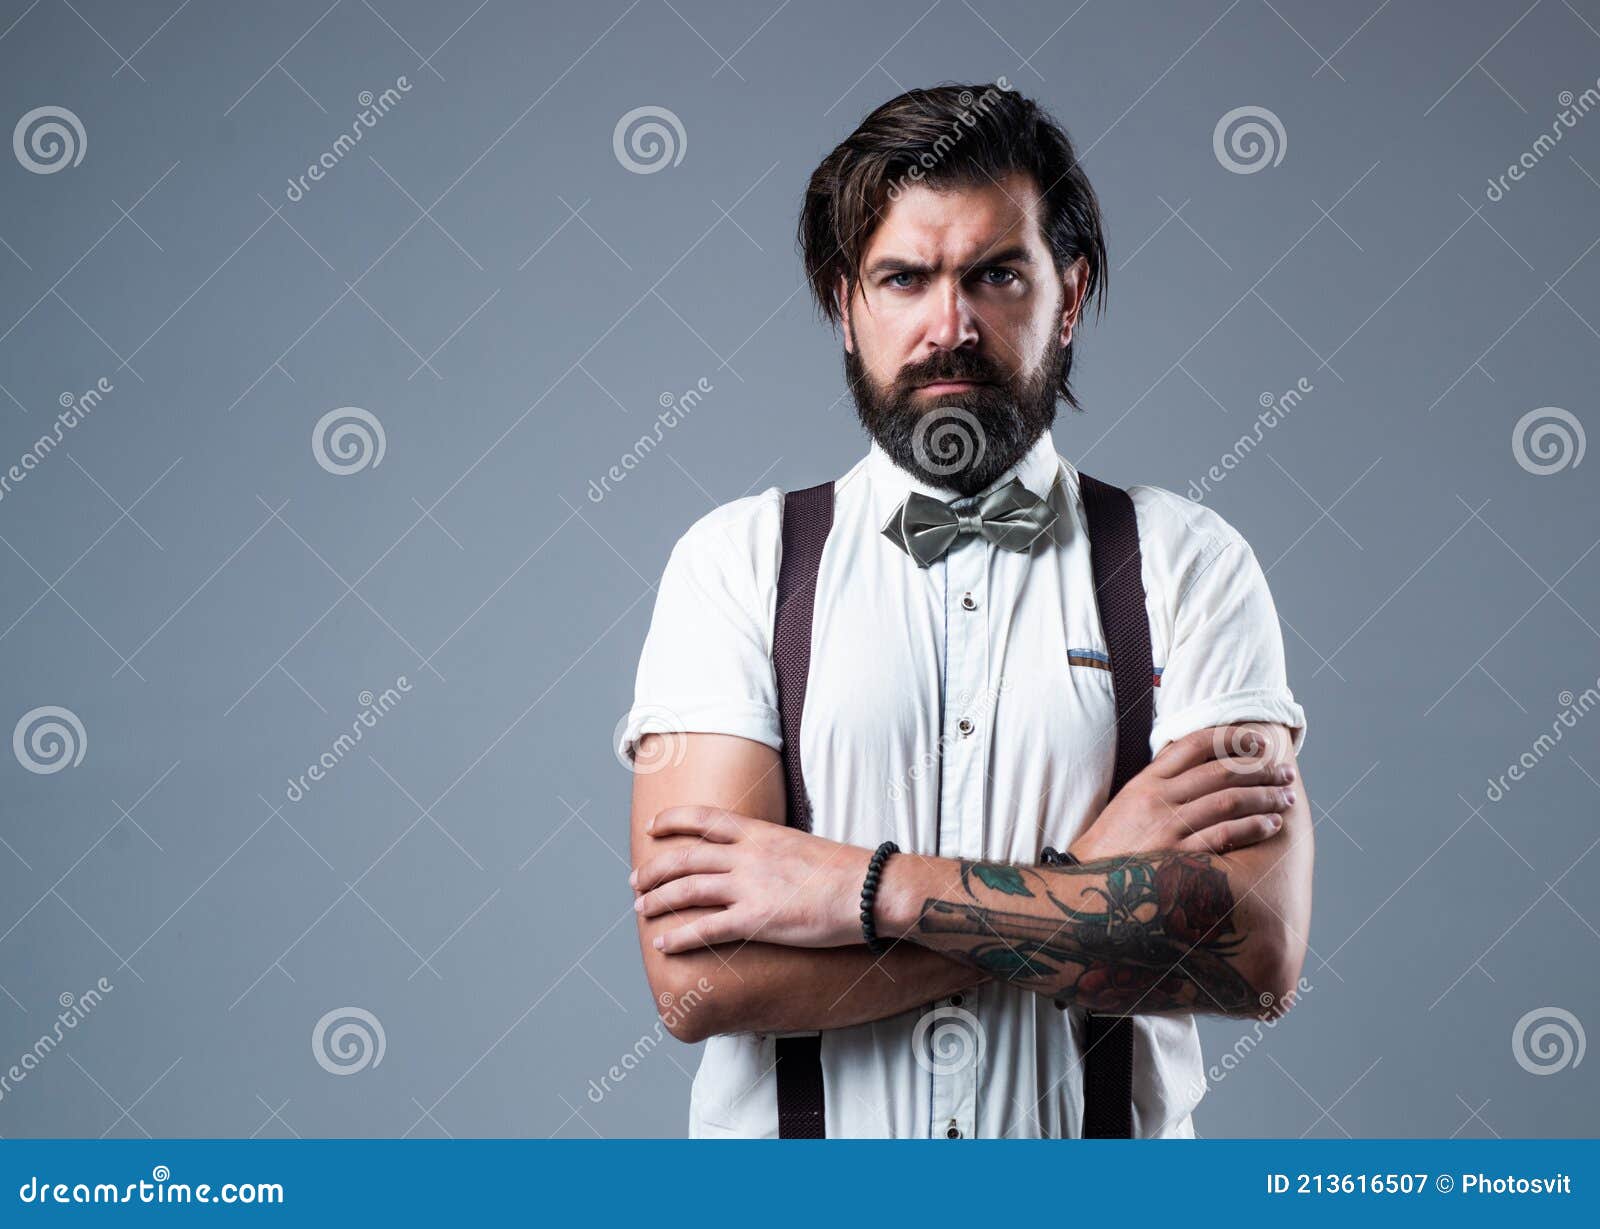 sink Spectacle forest Brutal Bearded Man with Moustache Wear Suspenders and Bow Tie, Confidence  Stock Image - Image of watchmaker, confident: 213616507